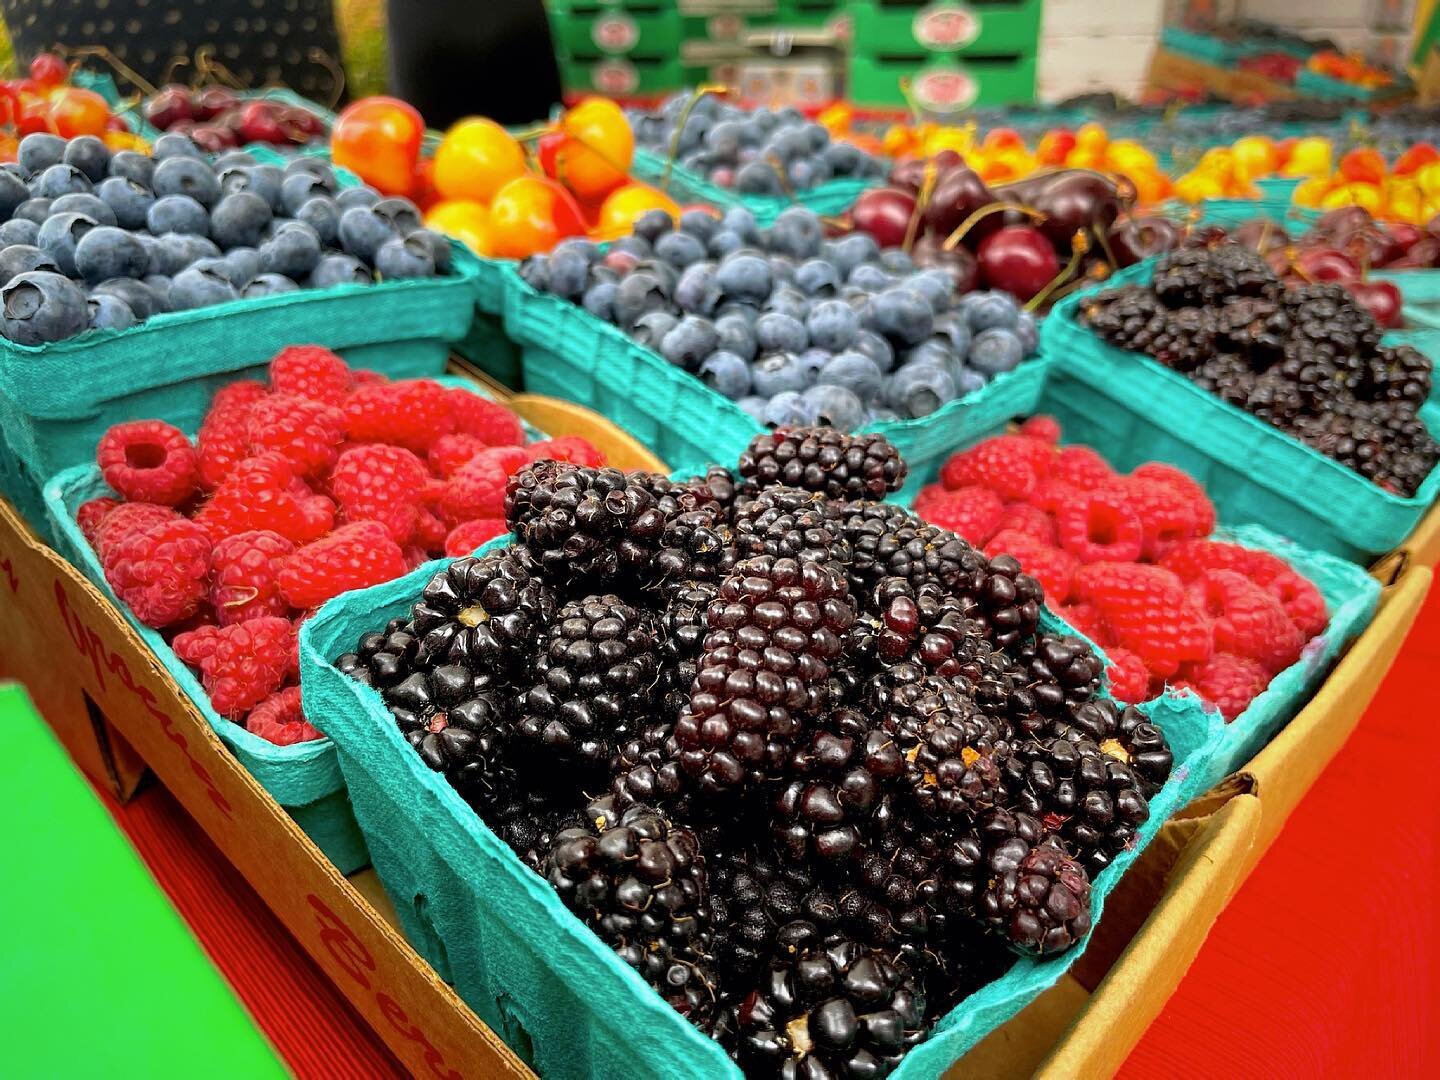 It&rsquo;s been a tough week for everyone, especially our farmers. Come on out and show your support for your local foods system by stopping by the South Waterfront Farmers Market today from 2:00 pm &ndash; 7:00 pm.

Bring home sweet berries from Val